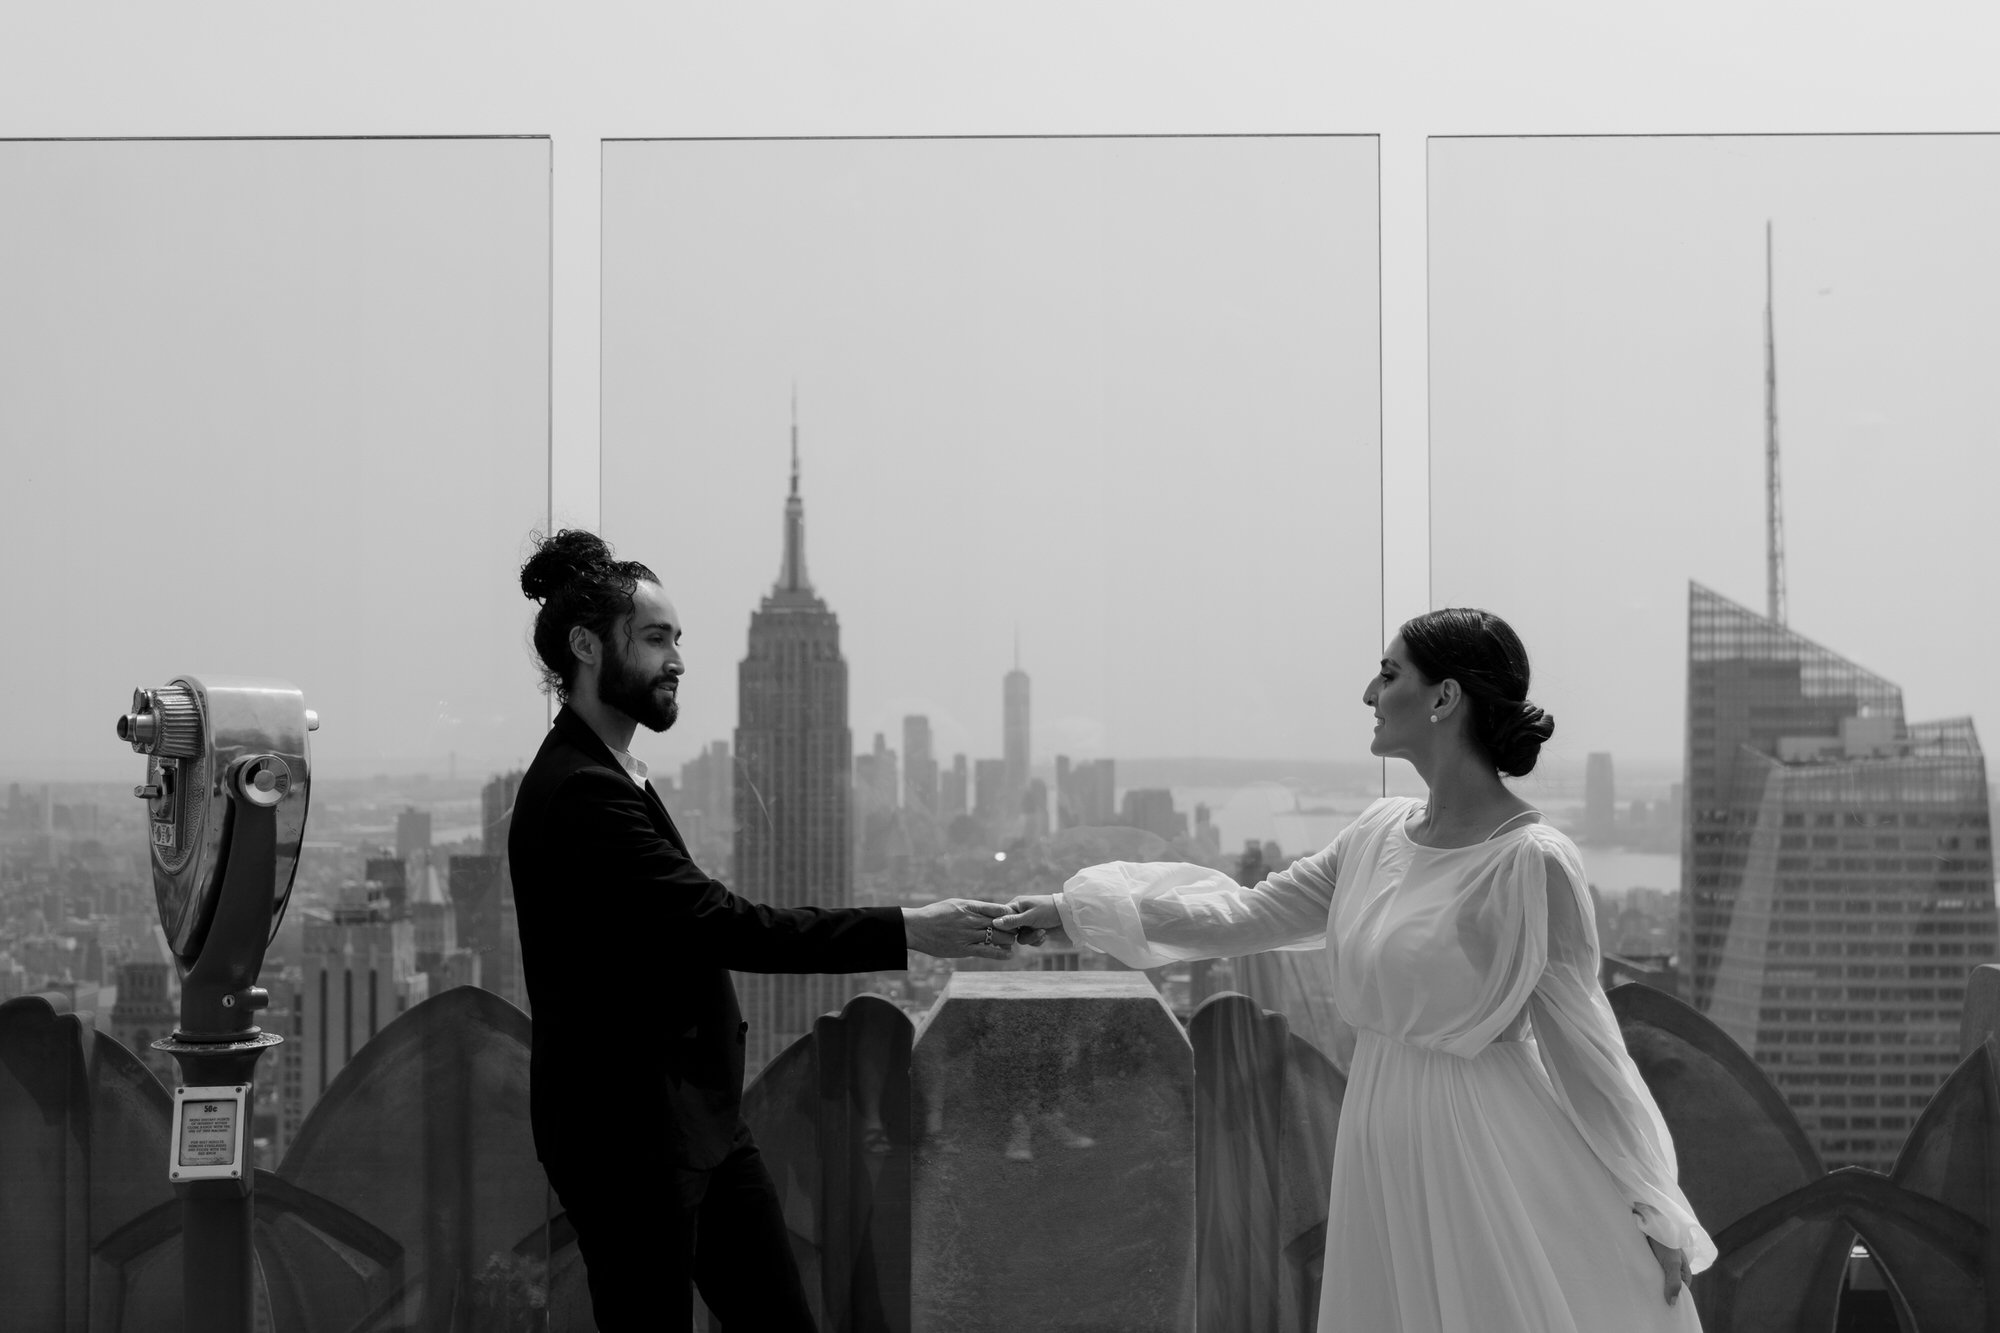 NYC-Top-of-The-Rock-Elopement-NYC-Photographer-Steph-Powell-Creative-39.jpg